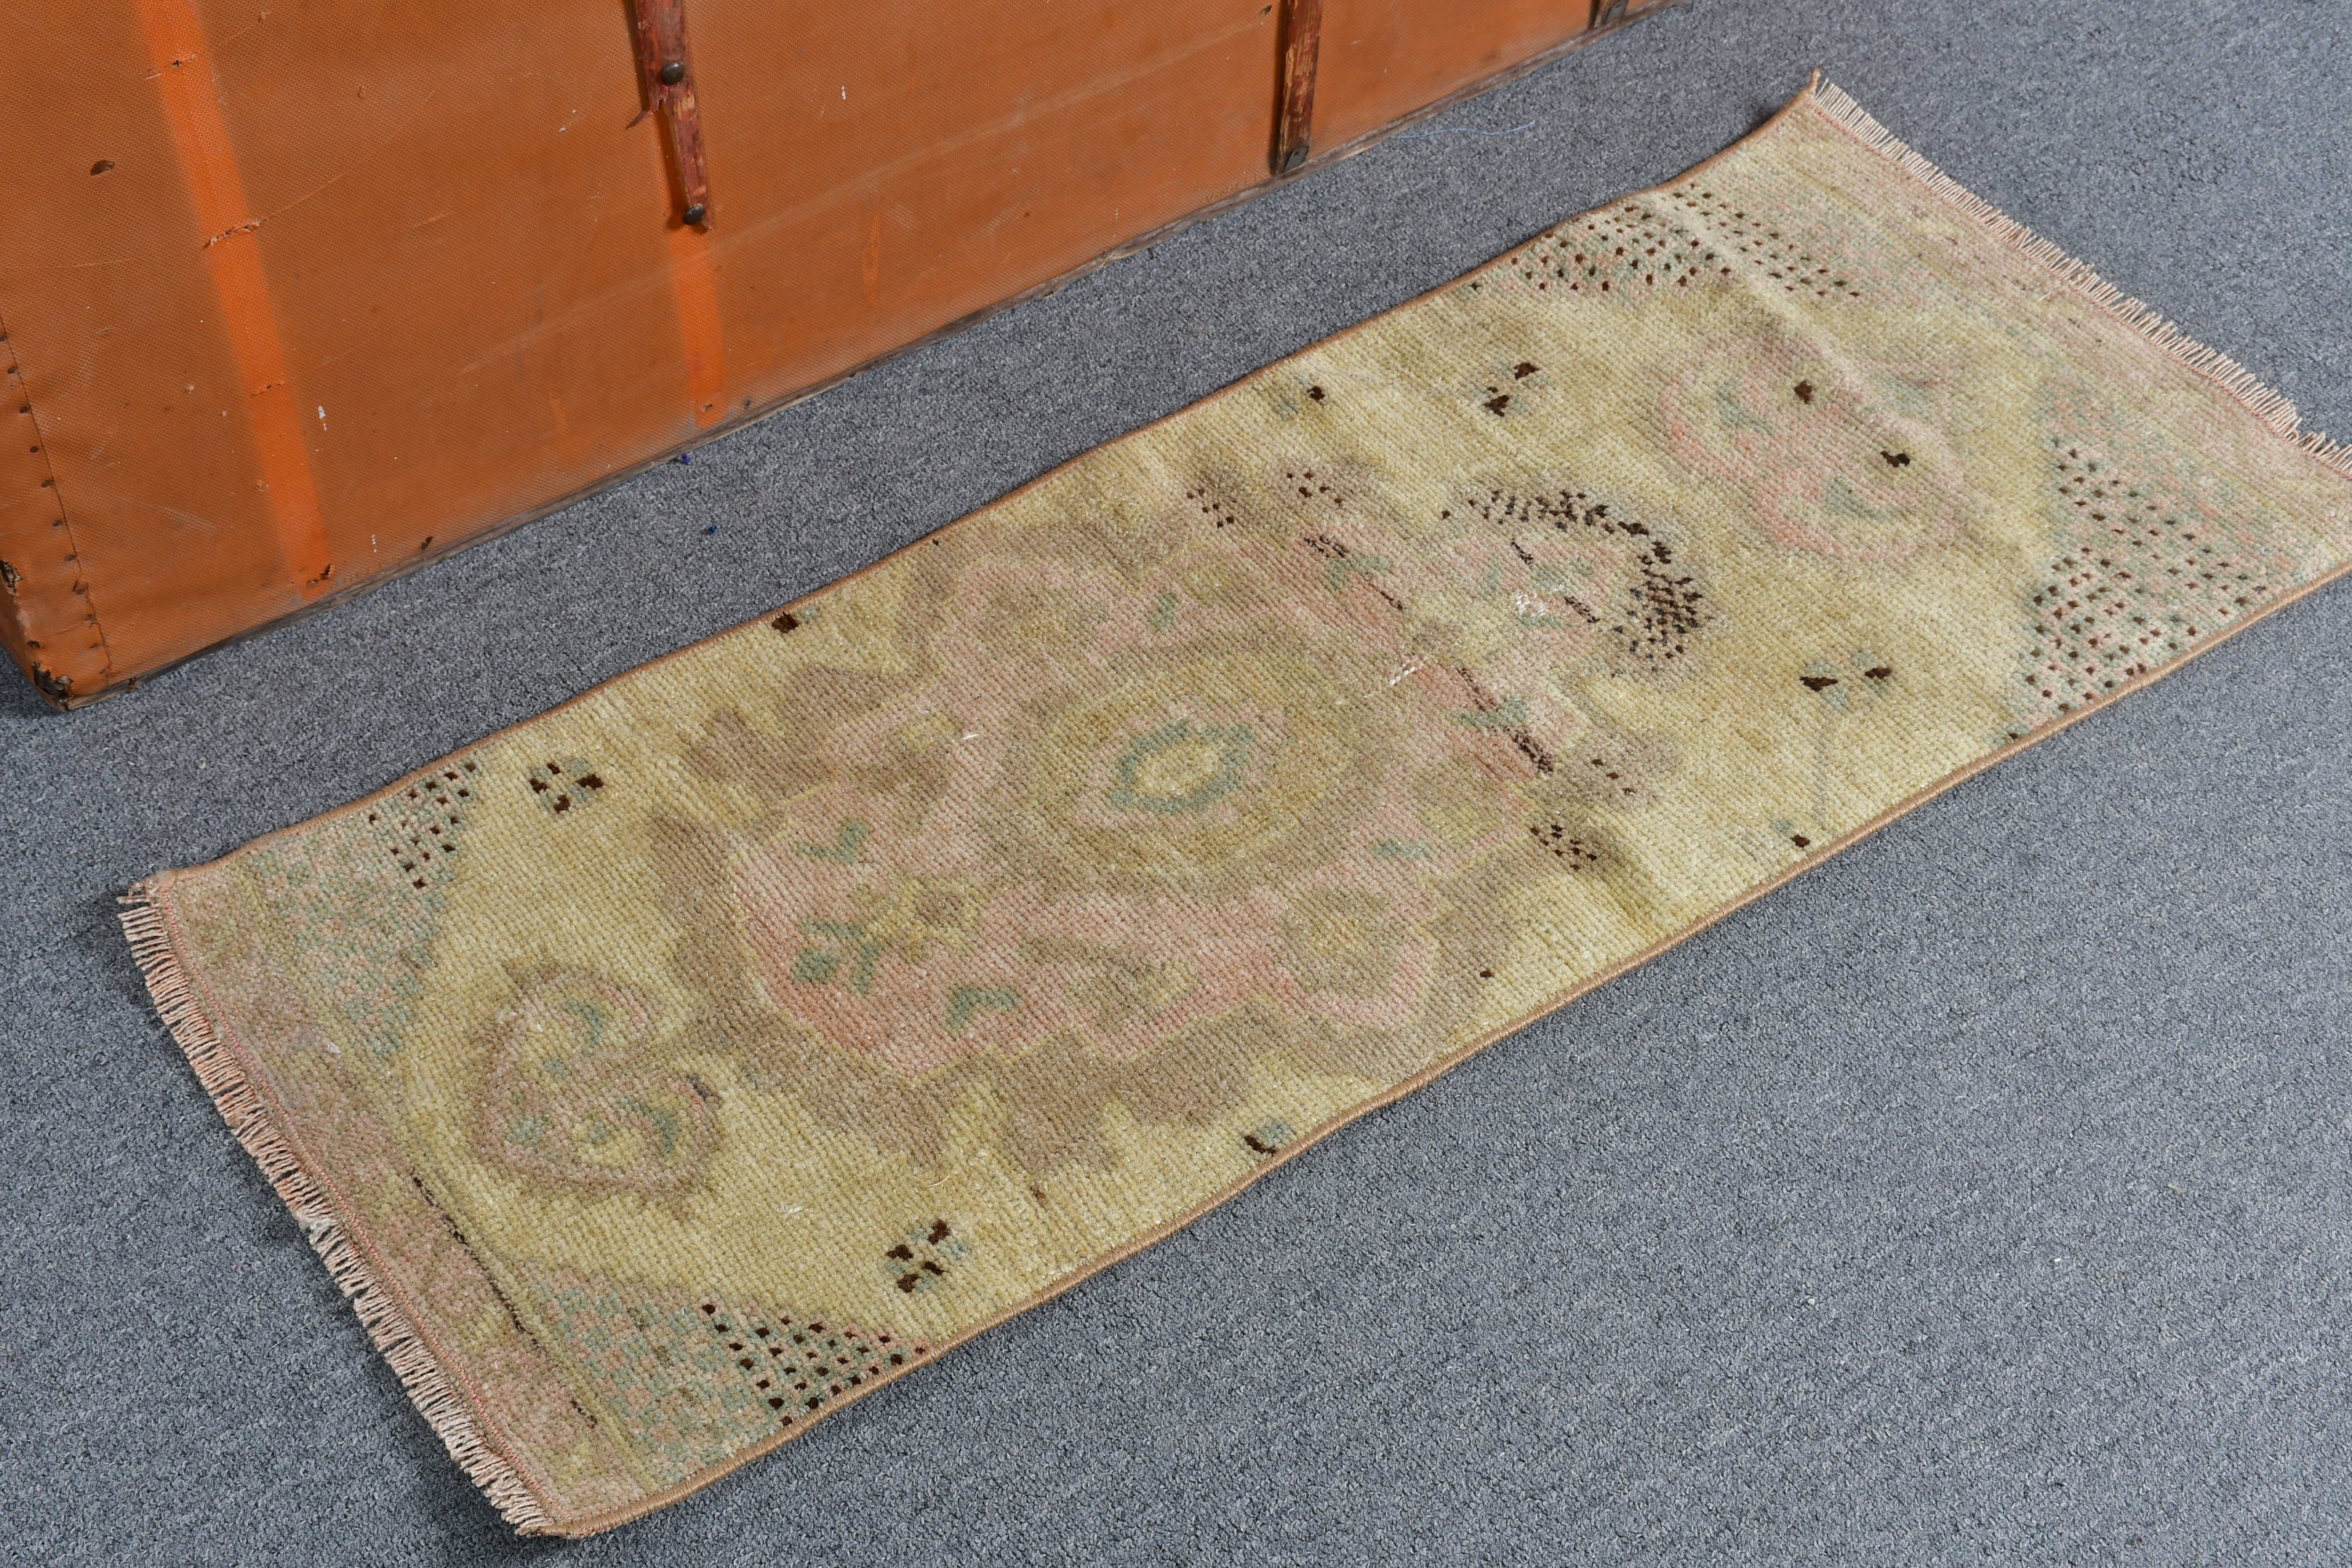 Anatolian Rug, Turkish Rug, Entry Rug, Kitchen Rugs, Cool Rug, Brown  1.2x3.1 ft Small Rugs, Vintage Rugs, Rugs for Car Mat